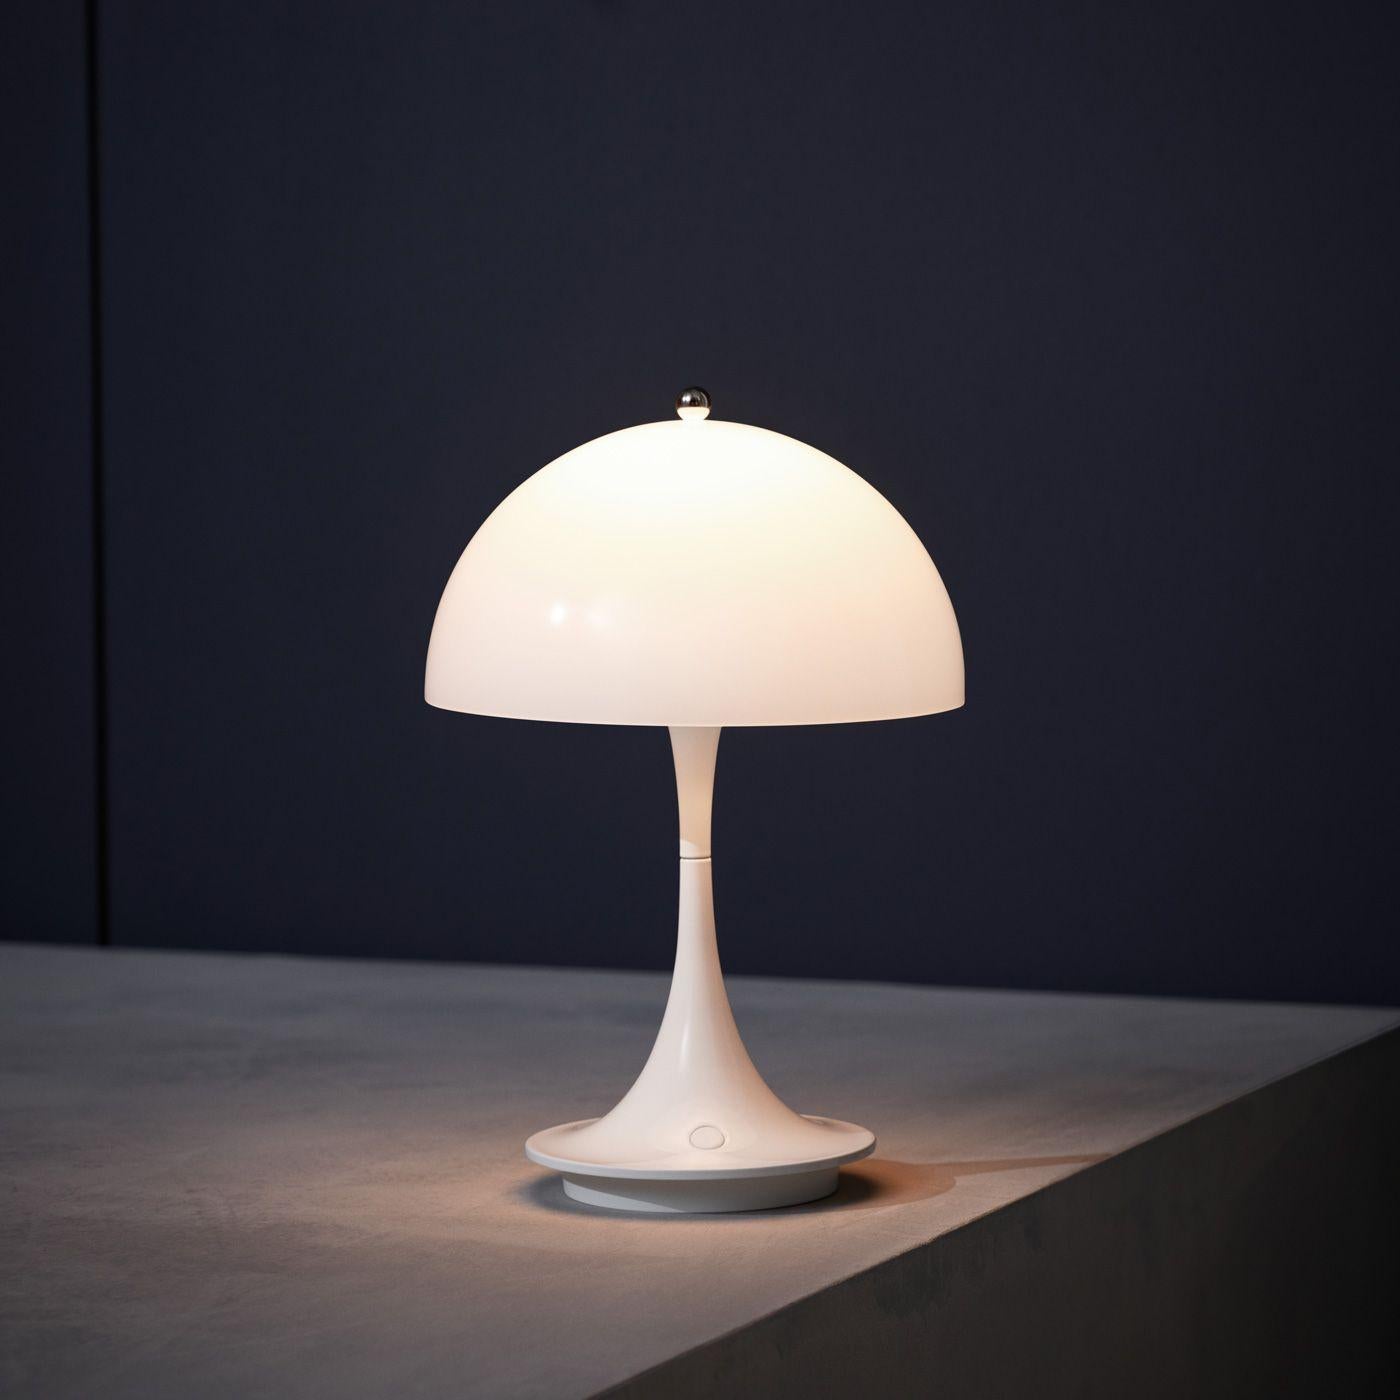 Louis Poulsen, portable table lamp by Verner Panton
Width x Height x Length (mm)
160 x 230 x 160, 0.5 kg
Finish: White opal acrylic Material: Shade: Injection moulded opal acrylic Base: Die cast aluminium Battery: Li-Ion Cable length: 1.5m.